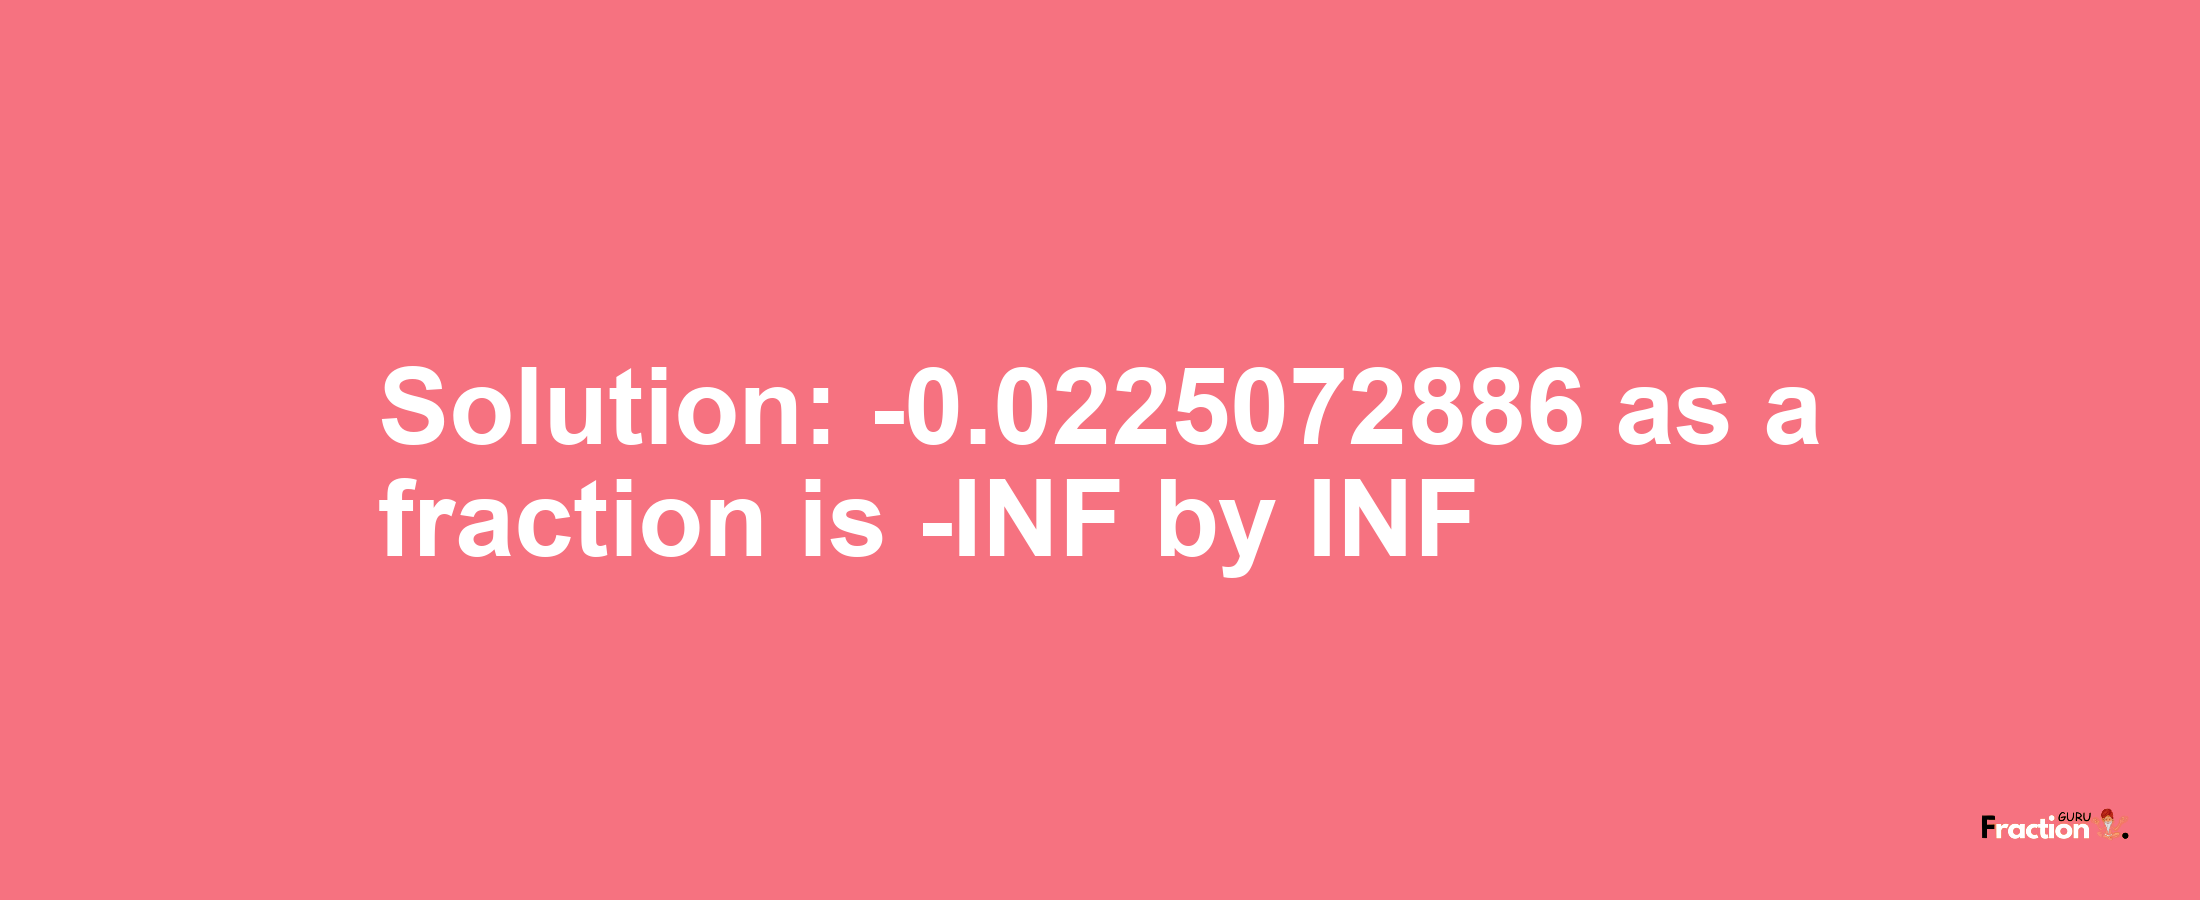 Solution:-0.0225072886 as a fraction is -INF/INF